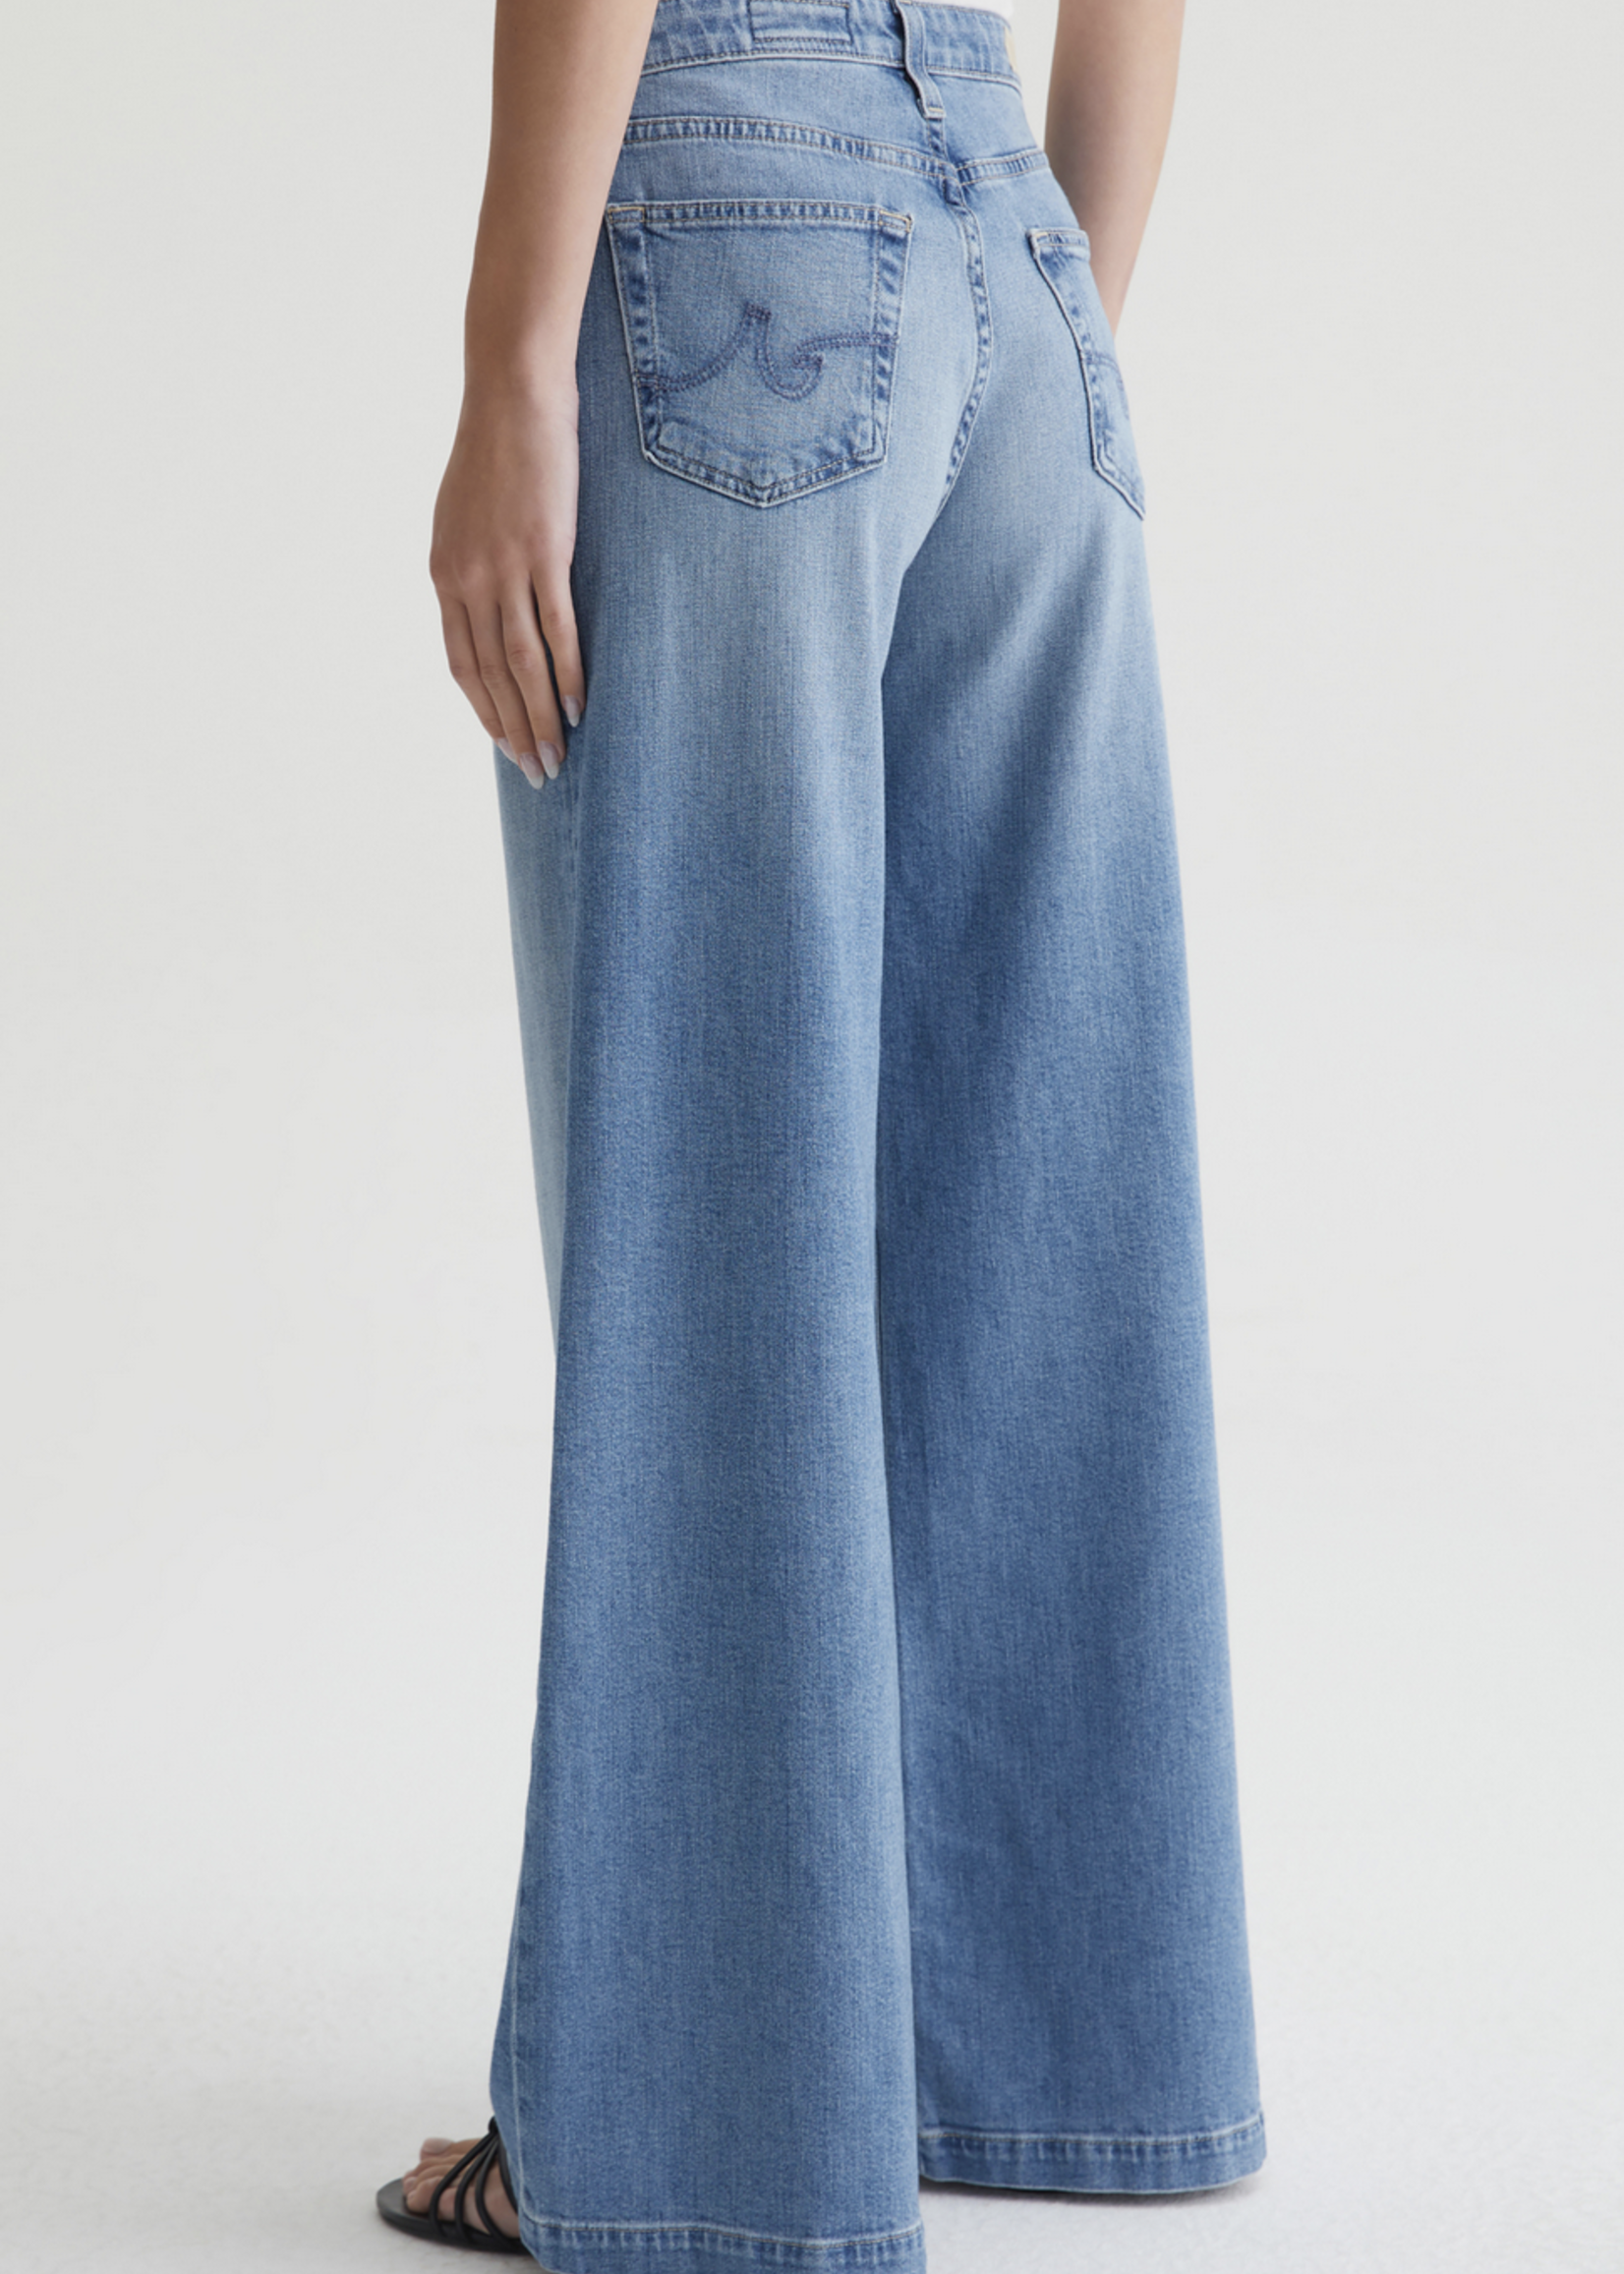 AG JEANS LEANA MID RISE PALAZZO JEAN